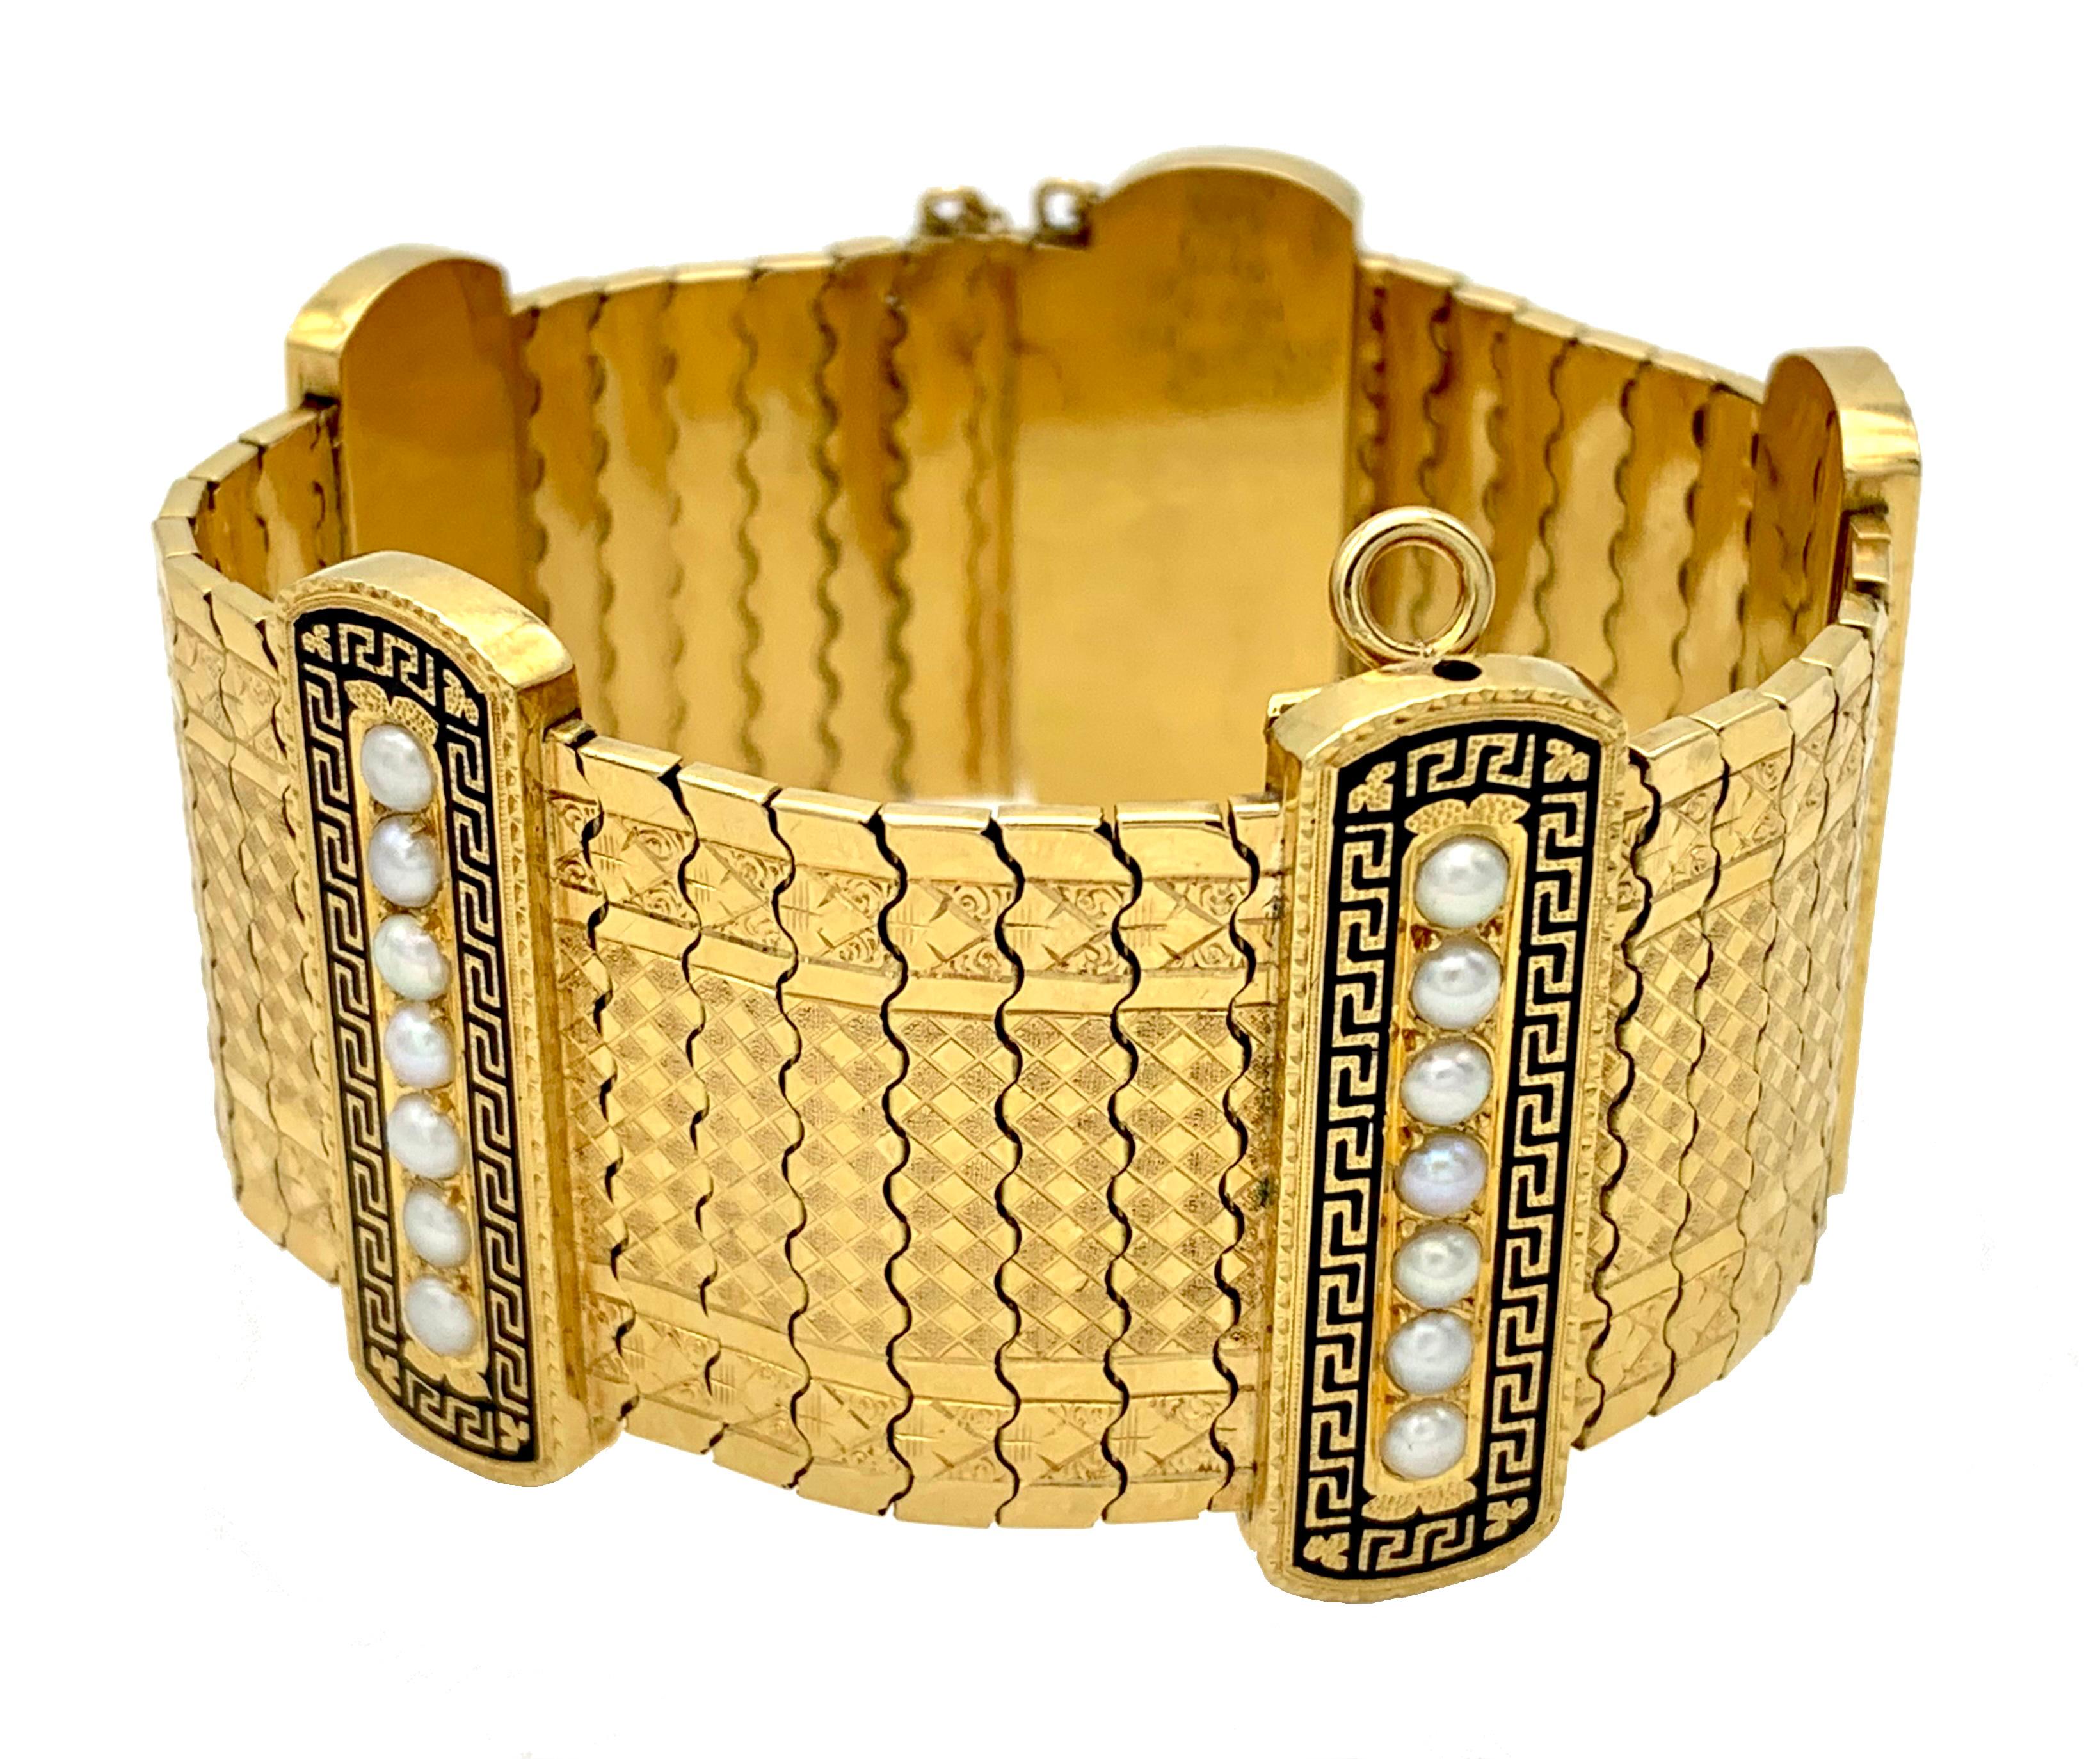 This very fine quality articulated bracelet was made in 1875 ca out of 18 karat gold. Five gold segments are set with 7 natural oriental pearls each within a finely chiselled Greek key pattern surrounded by black enamel. The pearl set segments